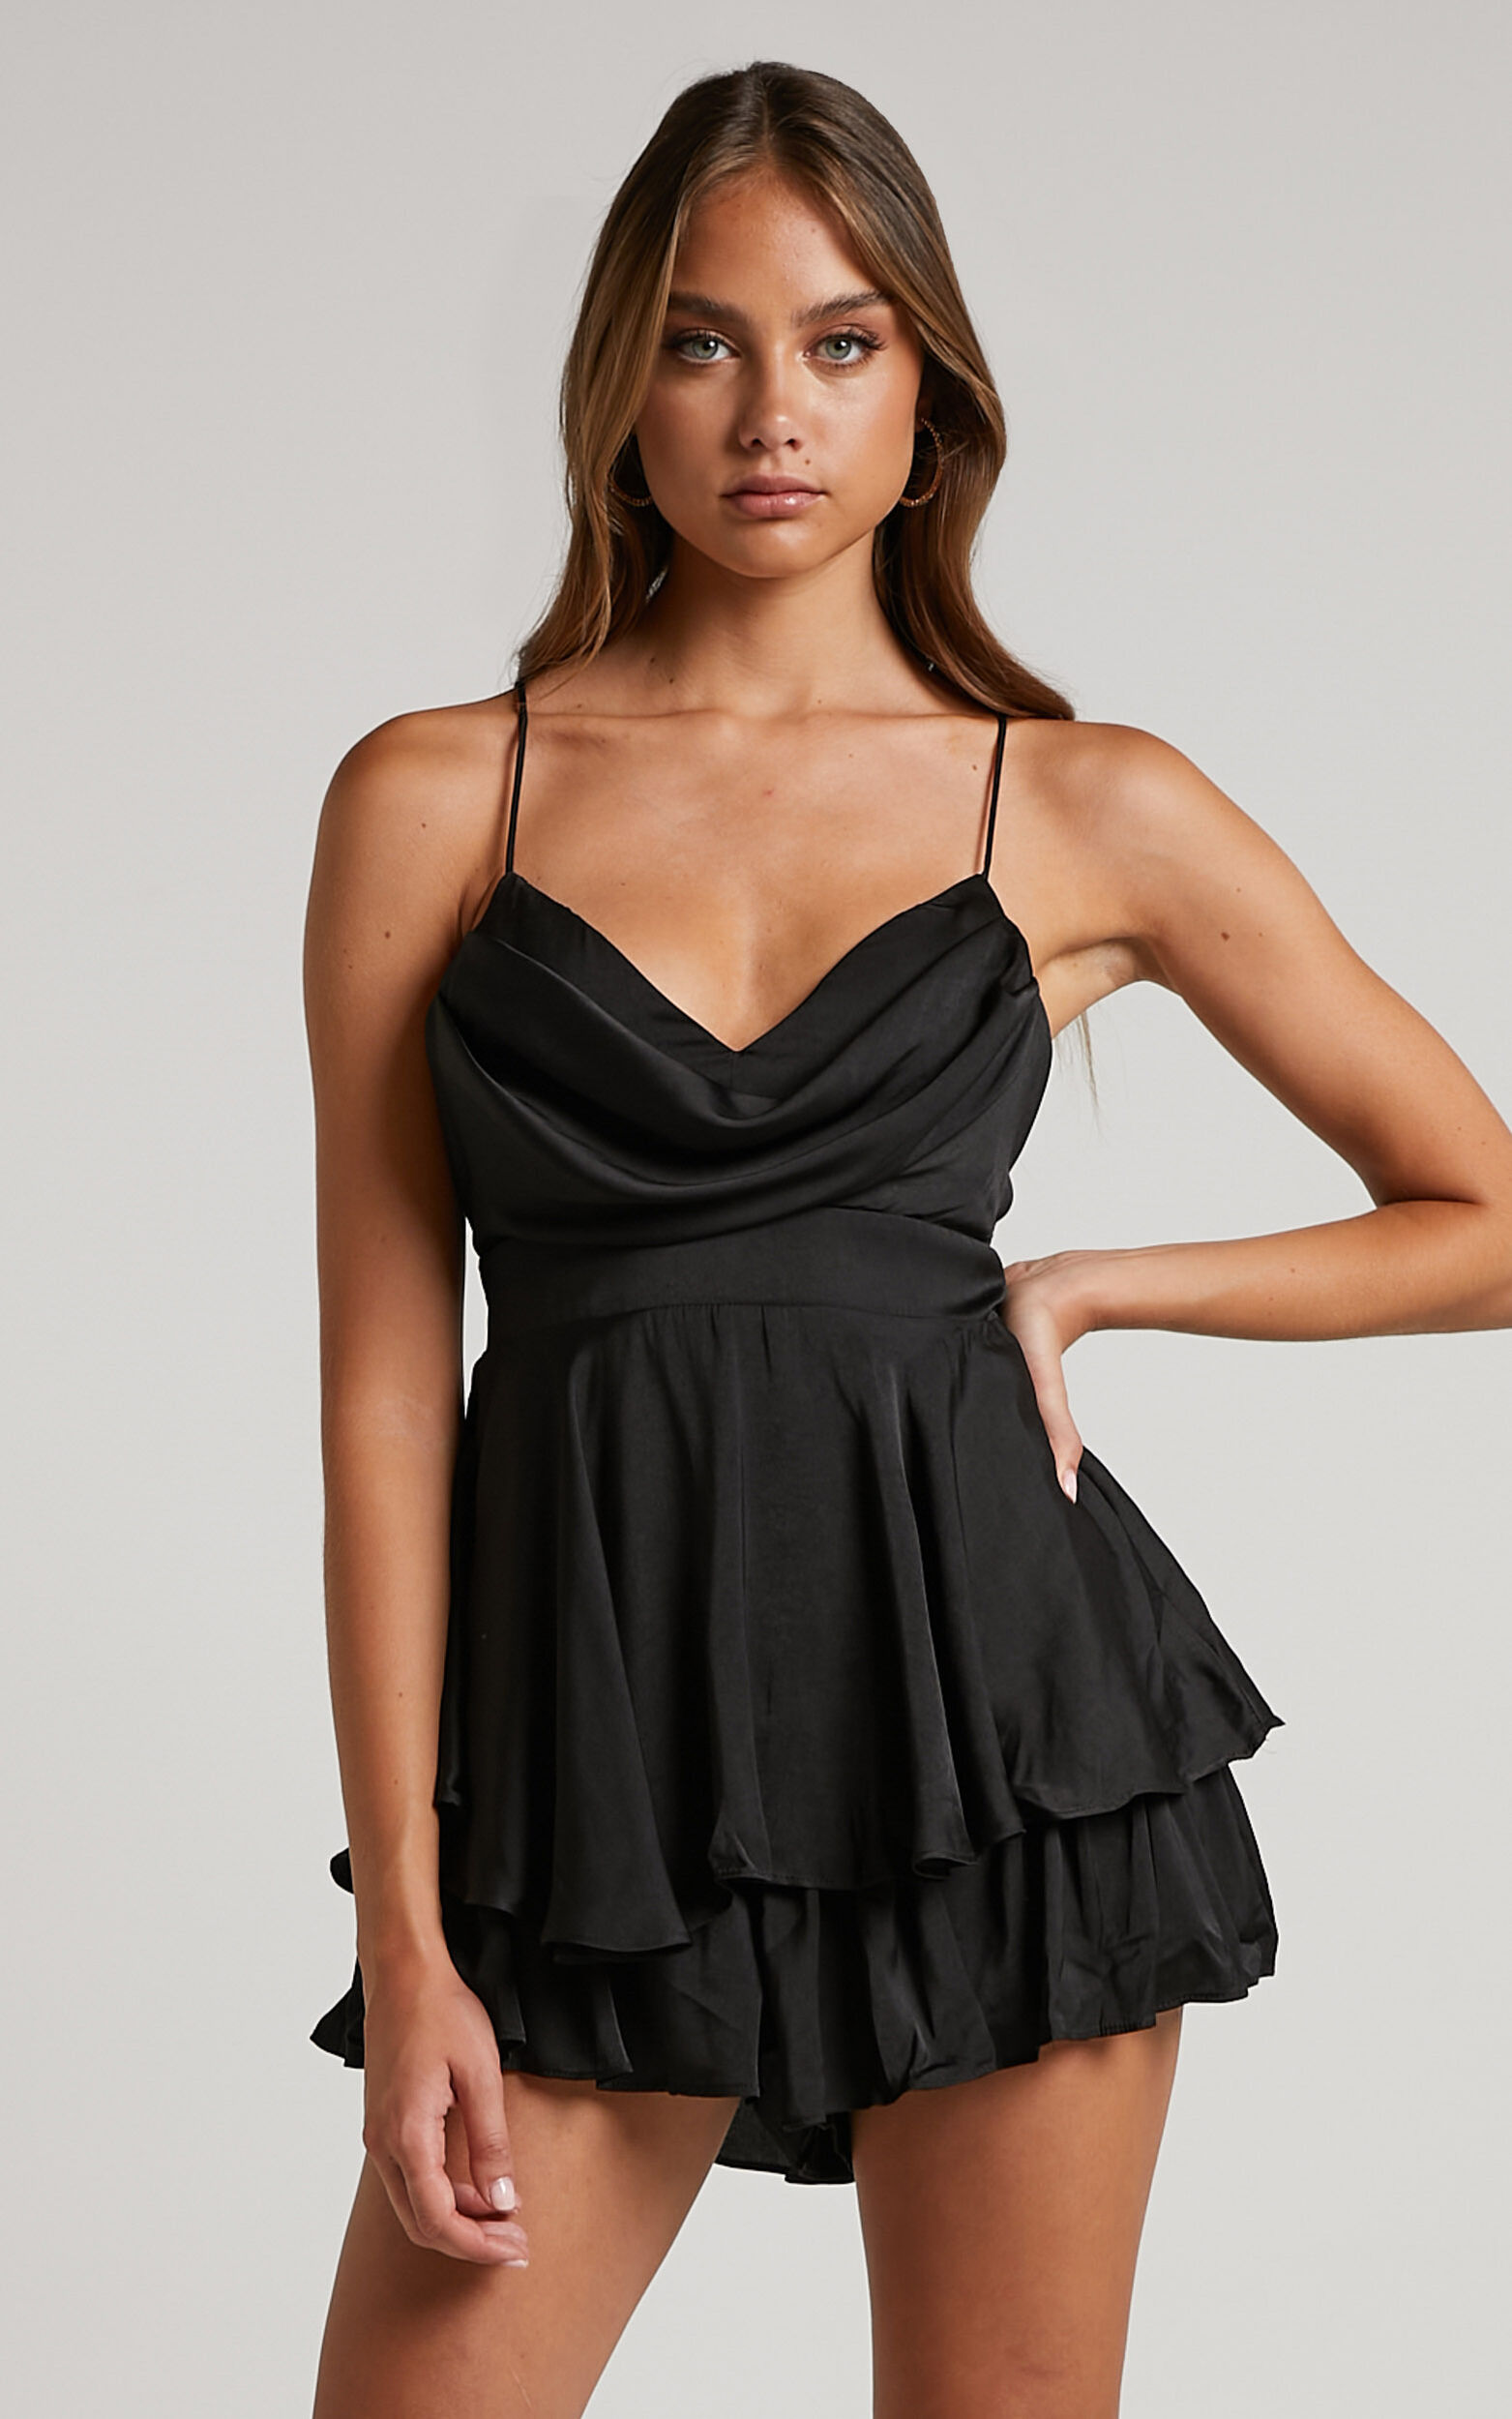 Delany Playsuit - Cowl Neck Layered Frill Playsuit in Black - 06, BLK1